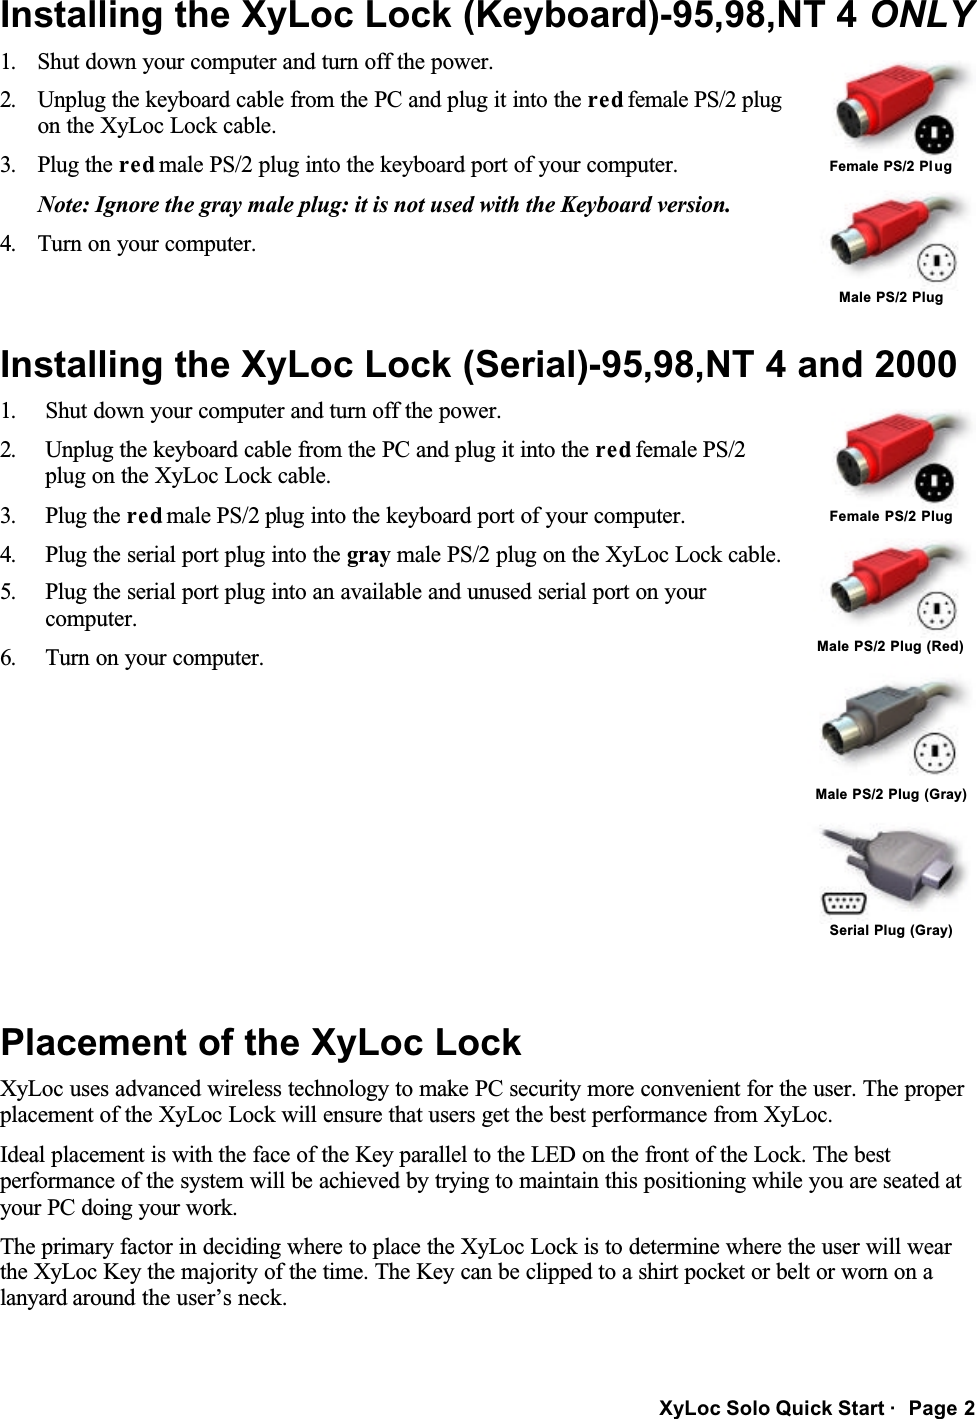 XyLoc Solo Quick Start ·  Page 2 Installing the XyLoc Lock (Keyboard)-95,98,NT 4 ONLY  Female PS/2 Plug 1.  Shut down your computer and turn off the power. 2.  Unplug the keyboard cable from the PC and plug it into the red female PS/2 plug on the XyLoc Lock cable.  3.  Plug the red male PS/2 plug into the keyboard port of your computer. Note: Ignore the gray male plug: it is not used with the Keyboard version. 4.  Turn on your computer.  Male PS/2 Plug Installing the XyLoc Lock (Serial)-95,98,NT 4 and 2000  Female PS/2 Plug  Male PS/2 Plug (Red)  Male PS/2 Plug (Gray) 1.  Shut down your computer and turn off the power. 2.  Unplug the keyboard cable from the PC and plug it into the red female PS/2 plug on the XyLoc Lock cable.  3.  Plug the red male PS/2 plug into the keyboard port of your computer. 4.  Plug the serial port plug into the gray male PS/2 plug on the XyLoc Lock cable. 5.  Plug the serial port plug into an available and unused serial port on your computer. 6.  Turn on your computer.  Serial Plug (Gray)  Placement of the XyLoc Lock XyLoc uses advanced wireless technology to make PC security more convenient for the user. The proper placement of the XyLoc Lock will ensure that users get the best performance from XyLoc. Ideal placement is with the face of the Key parallel to the LED on the front of the Lock. The best performance of the system will be achieved by trying to maintain this positioning while you are seated at your PC doing your work. The primary factor in deciding where to place the XyLoc Lock is to determine where the user will wear the XyLoc Key the majority of the time. The Key can be clipped to a shirt pocket or belt or worn on a lanyard around the user’s neck. 